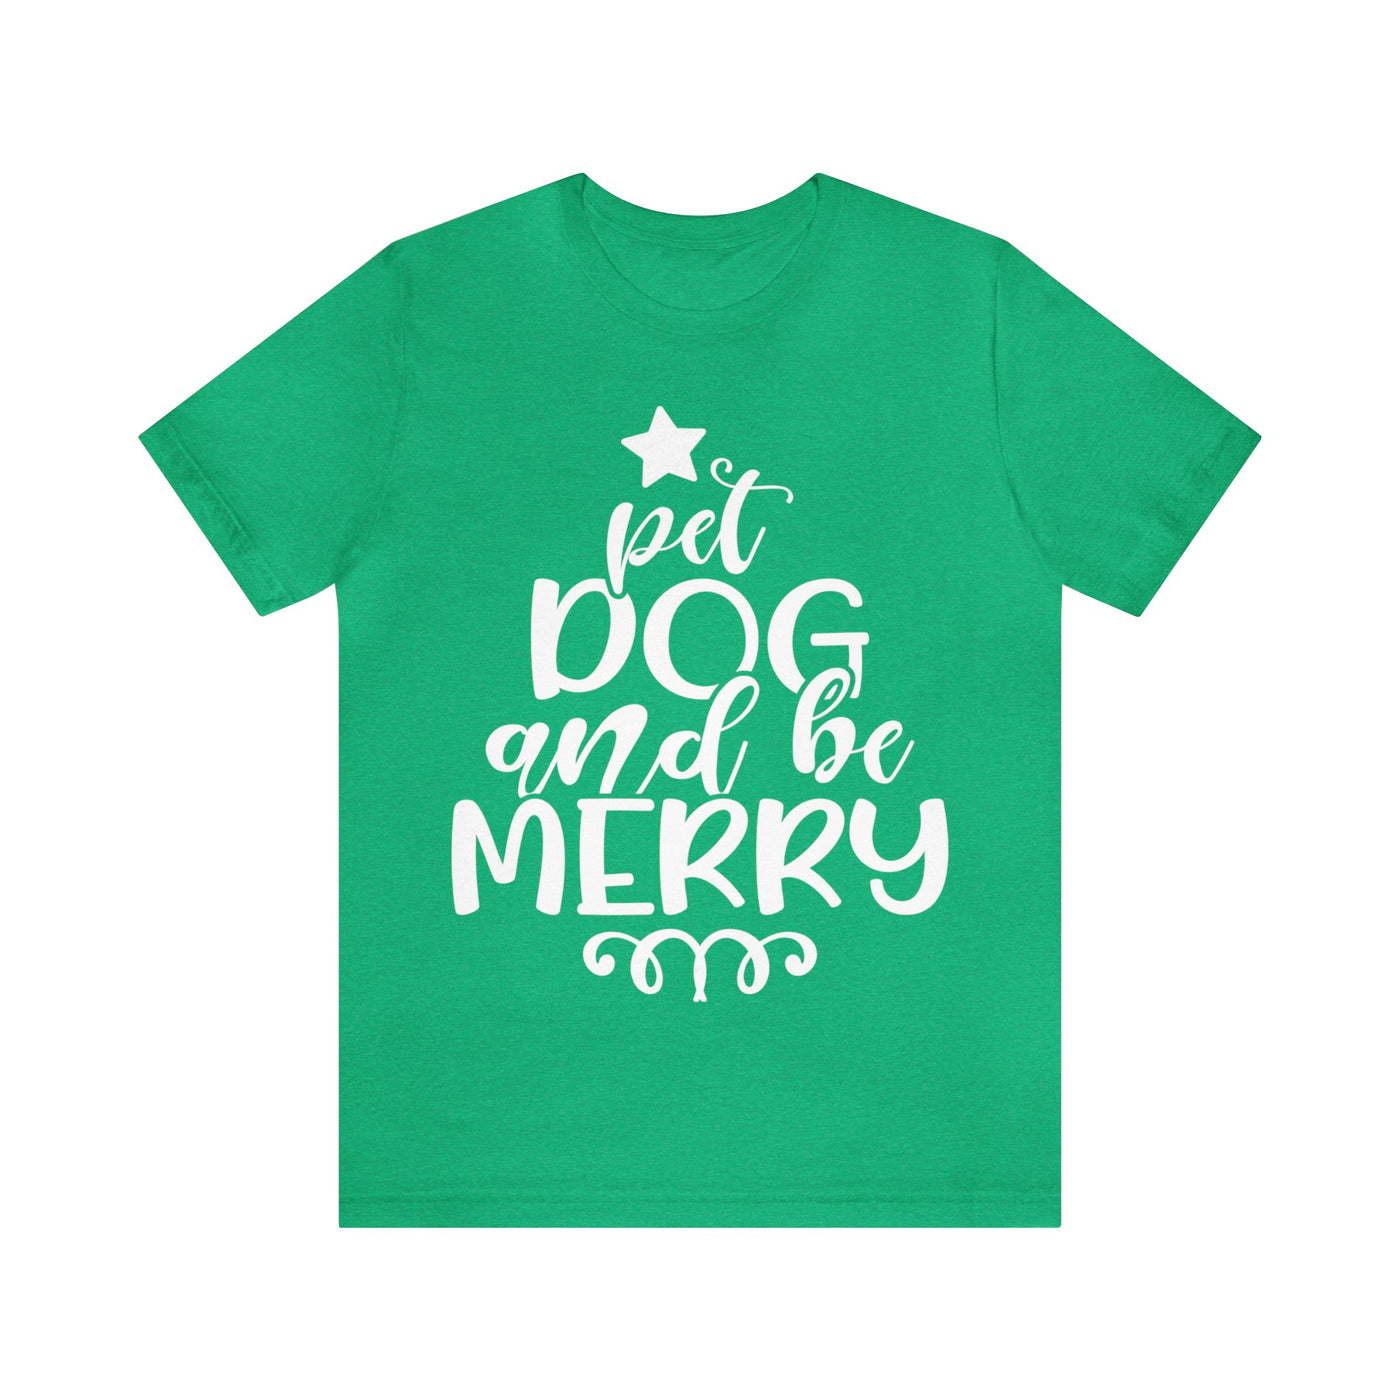 Pet Dog and be Merry T-Shirt